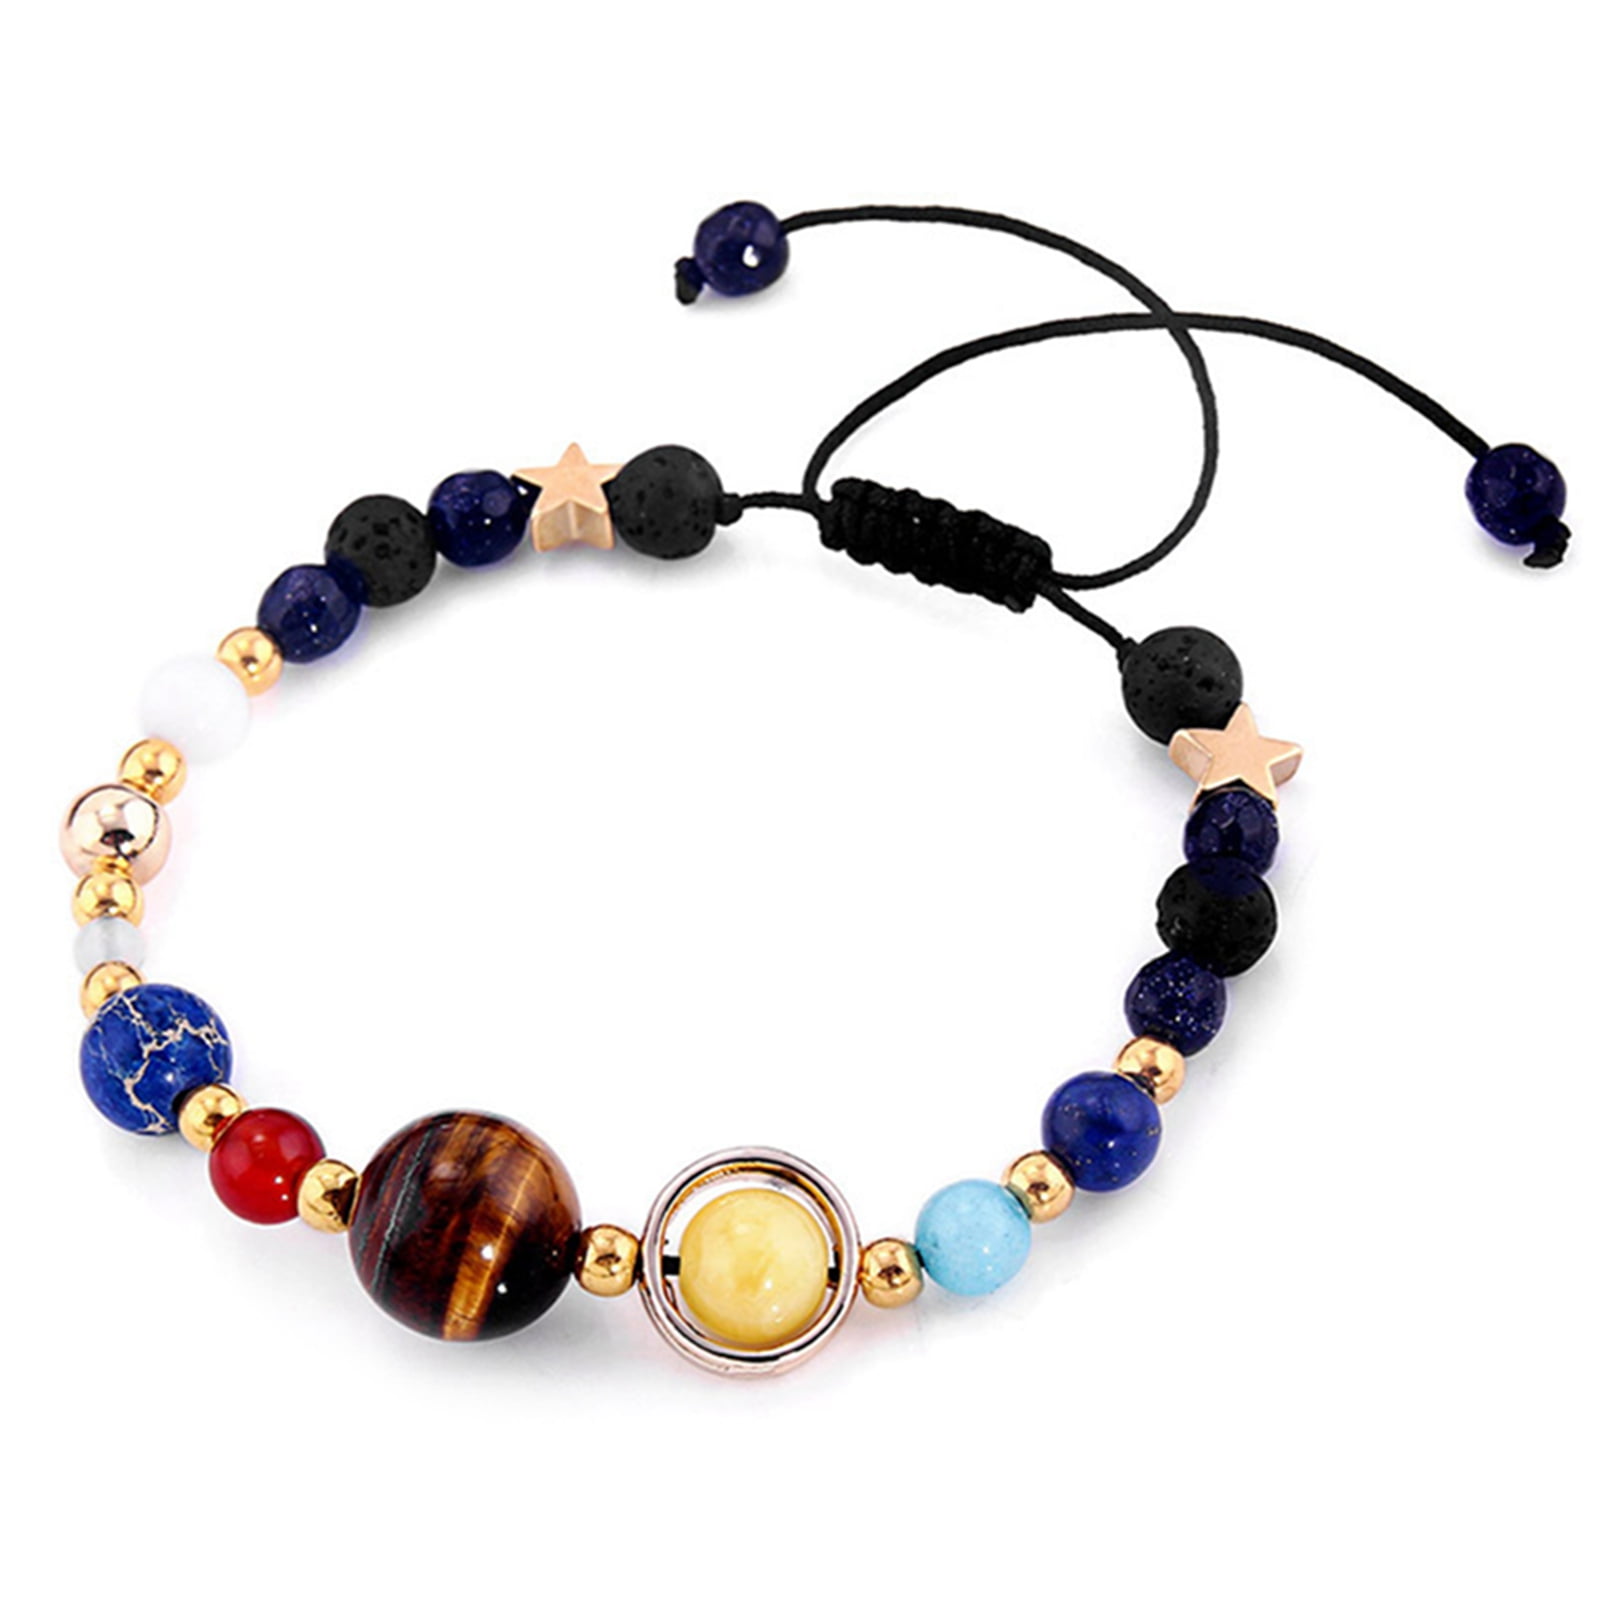 Solar System Bracelet Universe Galaxy The Eight Planets Guardian Star Natural Stone Beads Bracelet Bangle Gifts For Men Women Jewelry